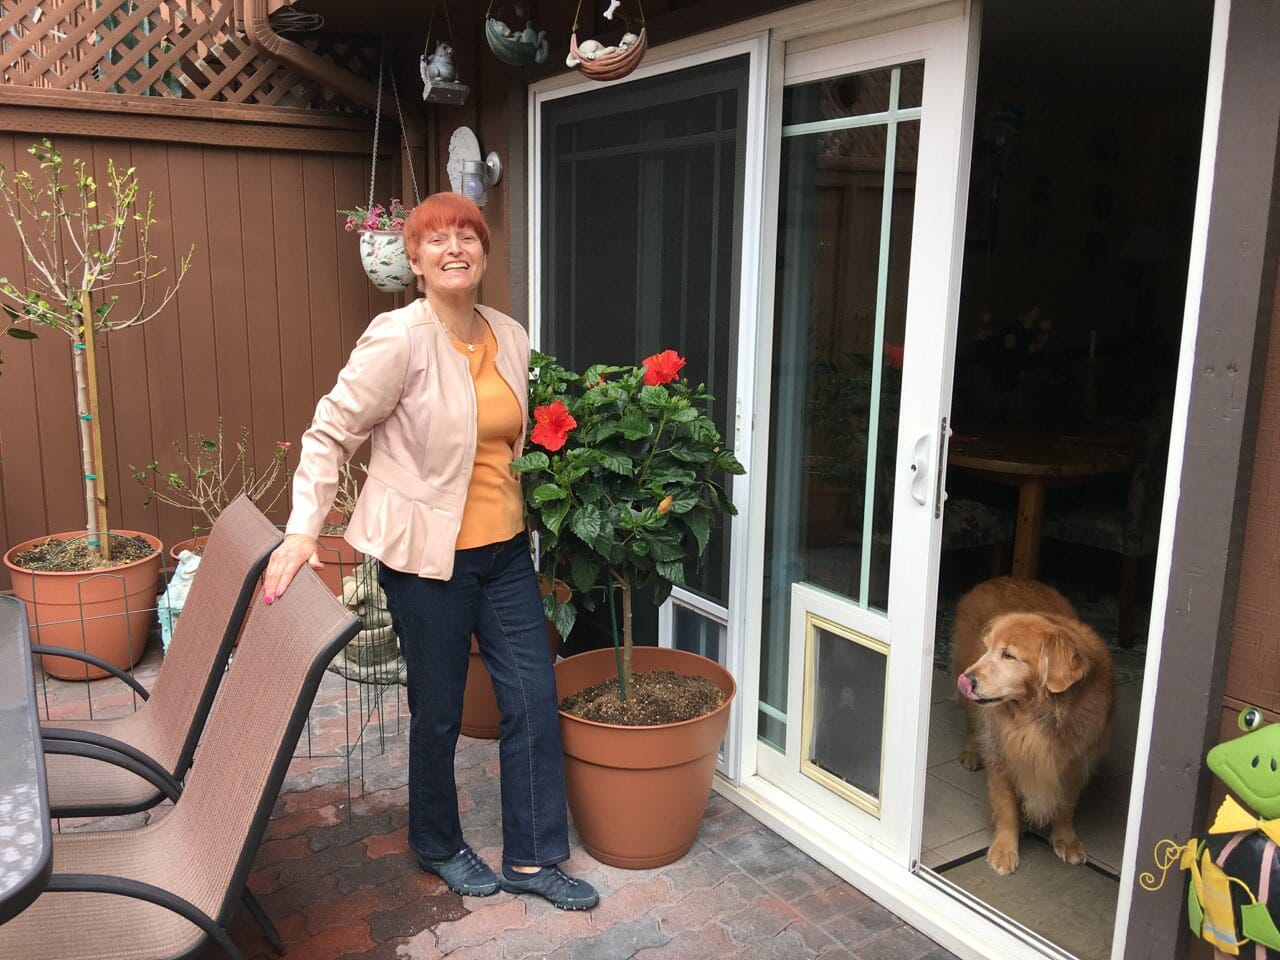 A Midnight Velvet customer and her dog by a patio garden, wearing a blush peplum jacket, peach top, and denim jeans.